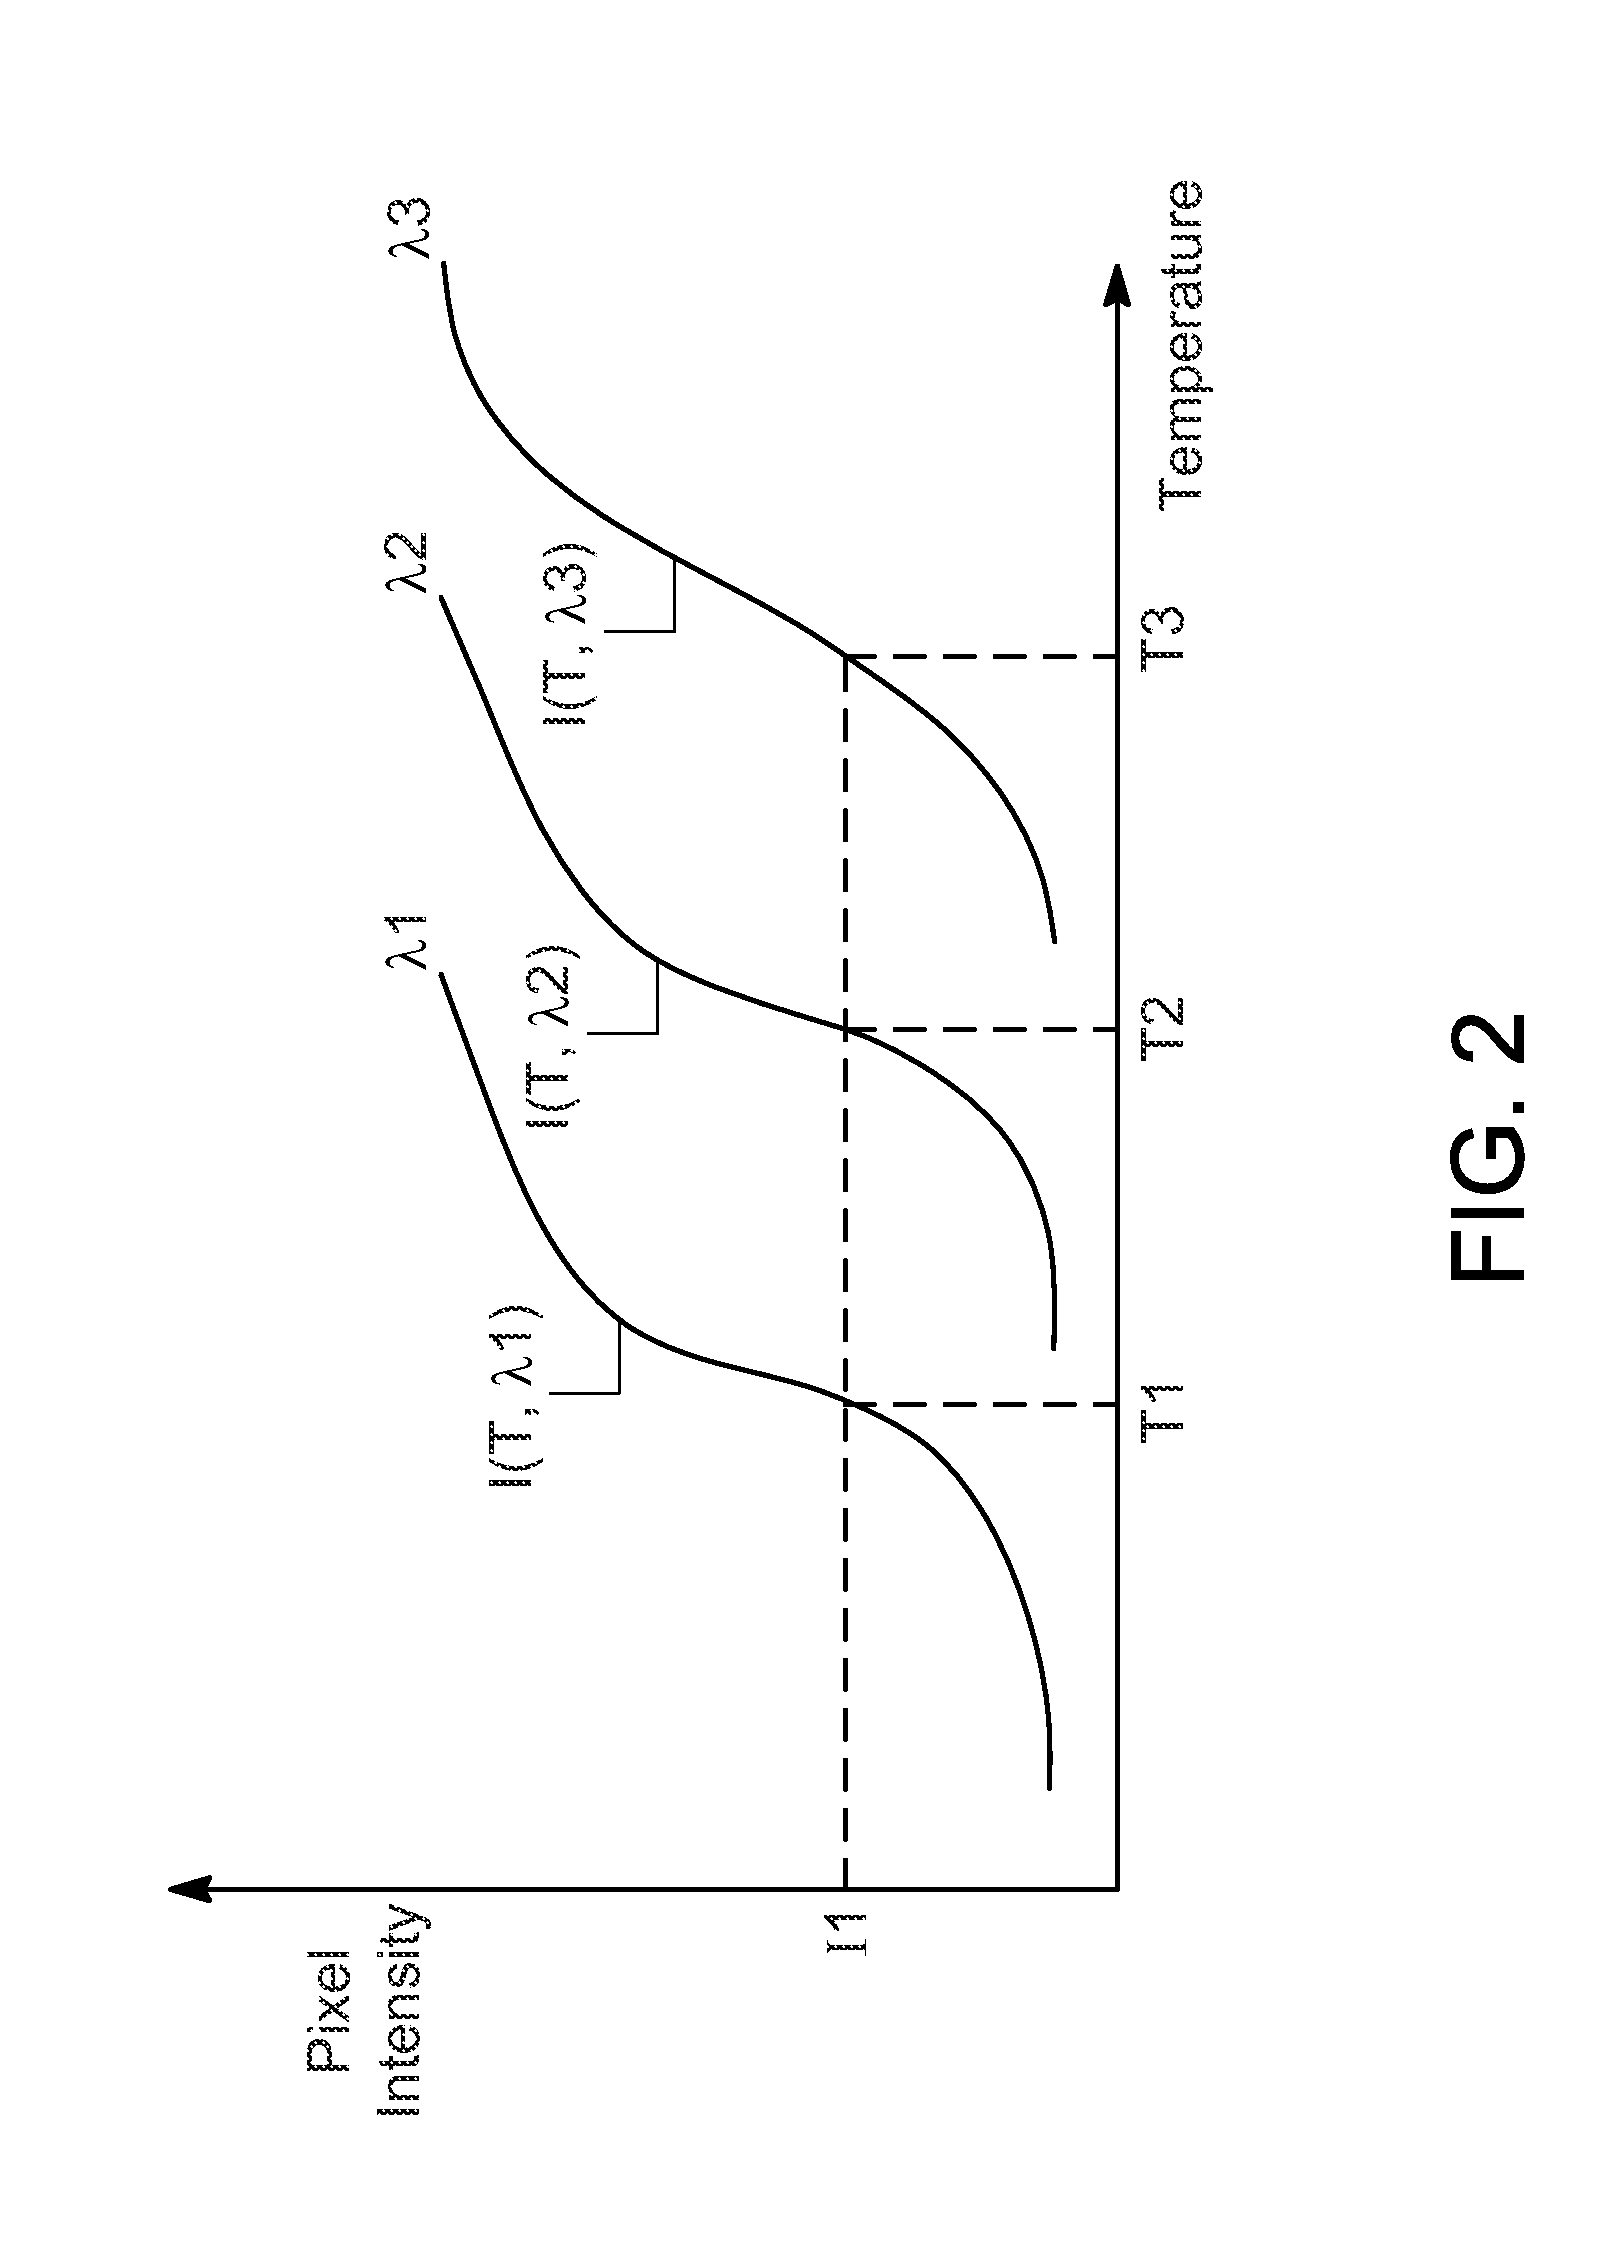 Extended temperature mapping process of a furnace enclosure with multi-spectral image-capturing device